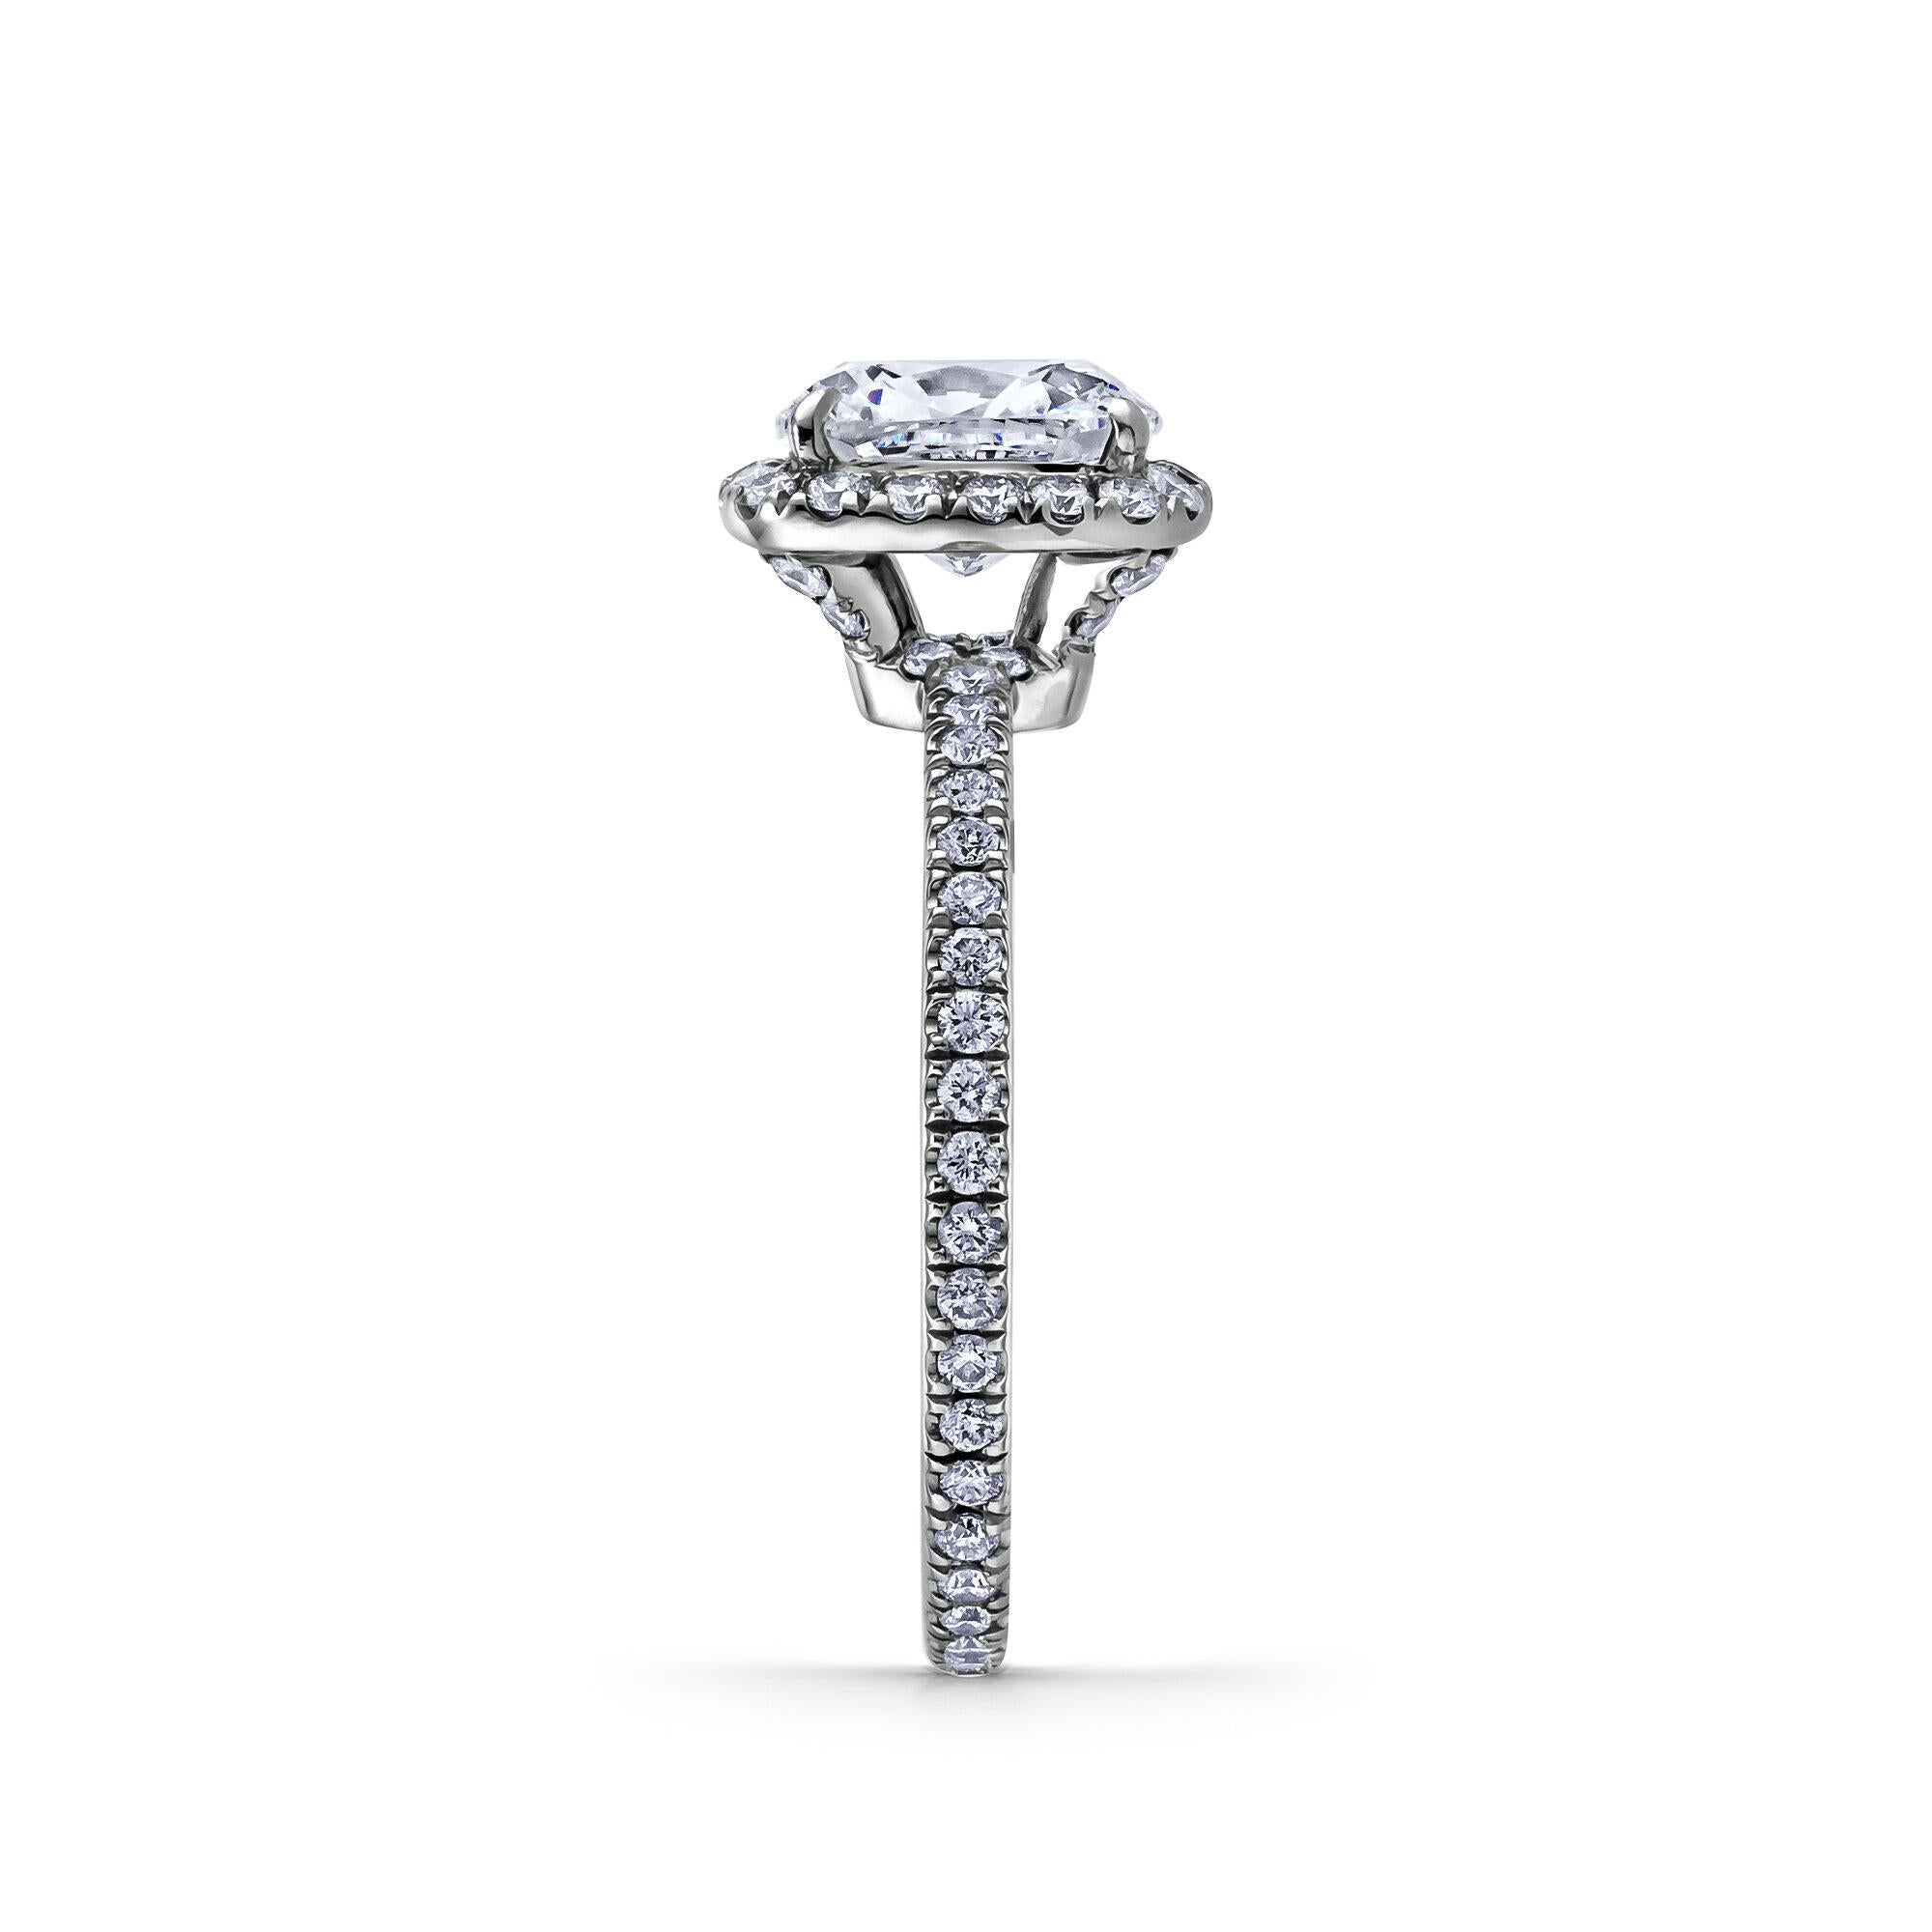 From the House of Harry Winston, this 1.28 carat cushion cut diamond platinum engagement ring symbolizes true love that will last a lifetime. Framed by pave-set round brilliant cut diamonds and a pave-set round brilliant cut diamond band weighing a